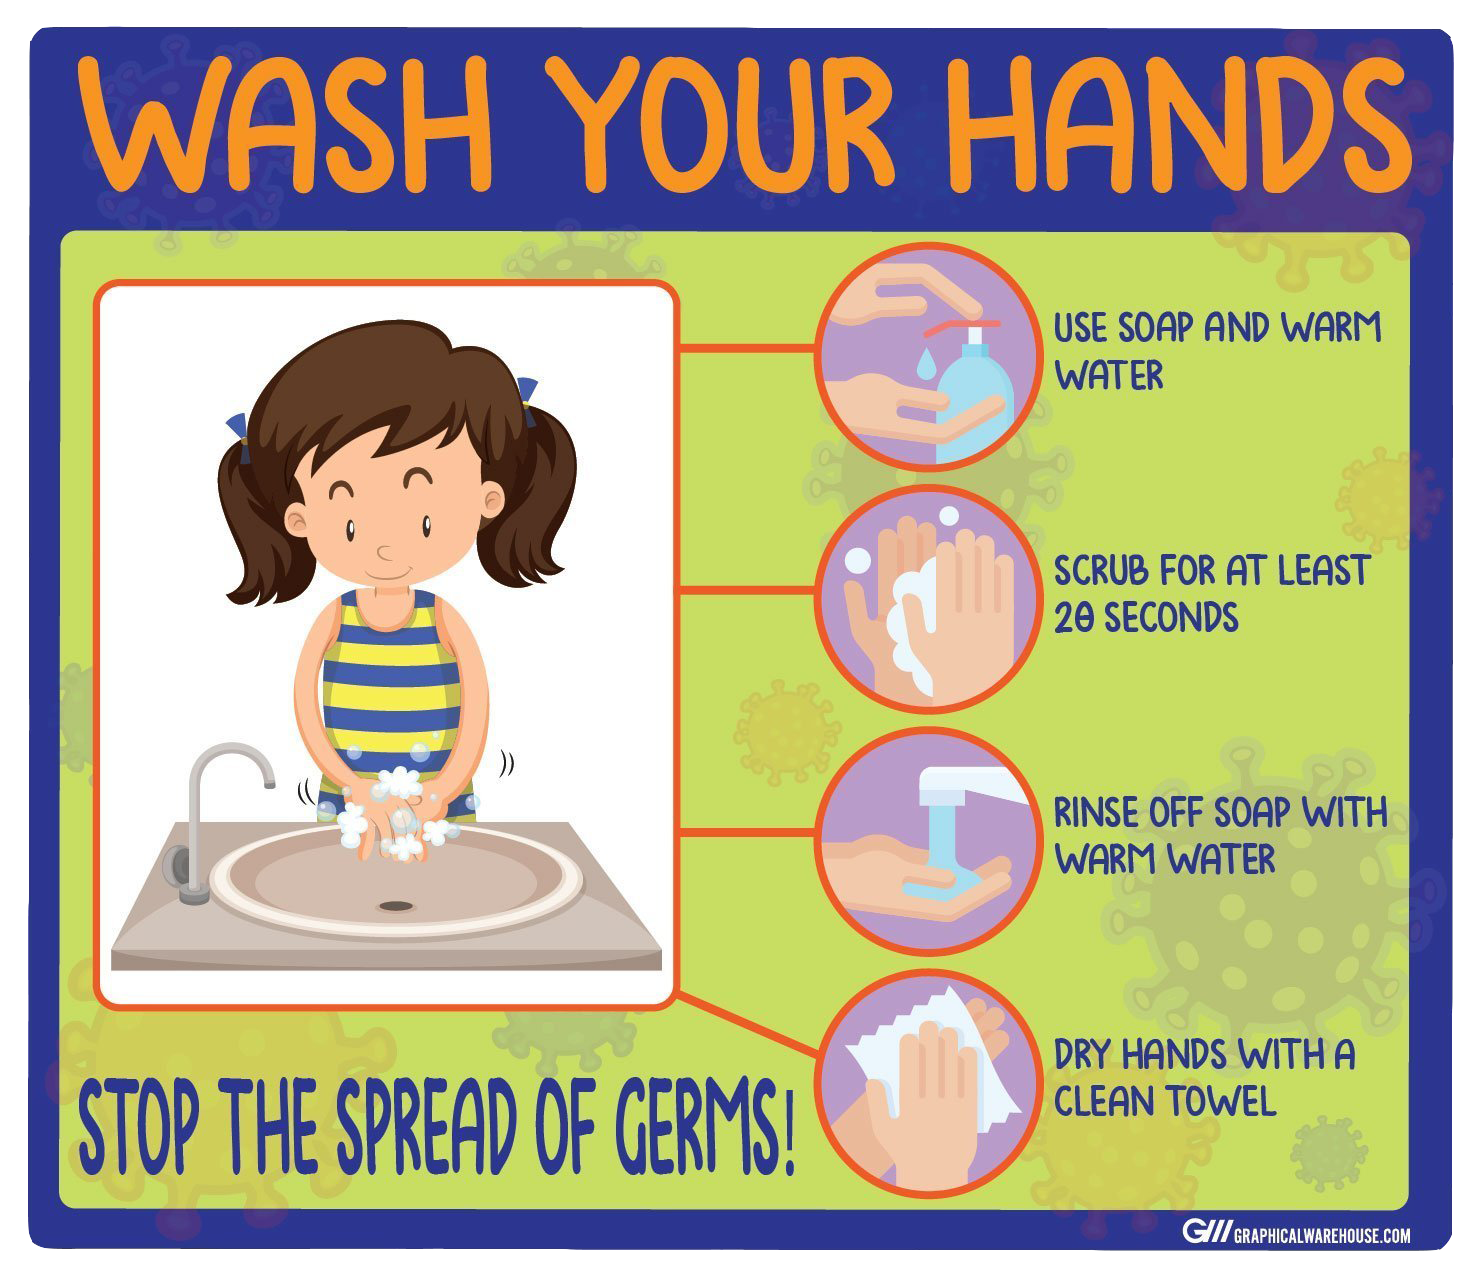 "Wash Your Hands" Kids Version, Adhesive Durable Vinyl Decal- Various Sizes Available